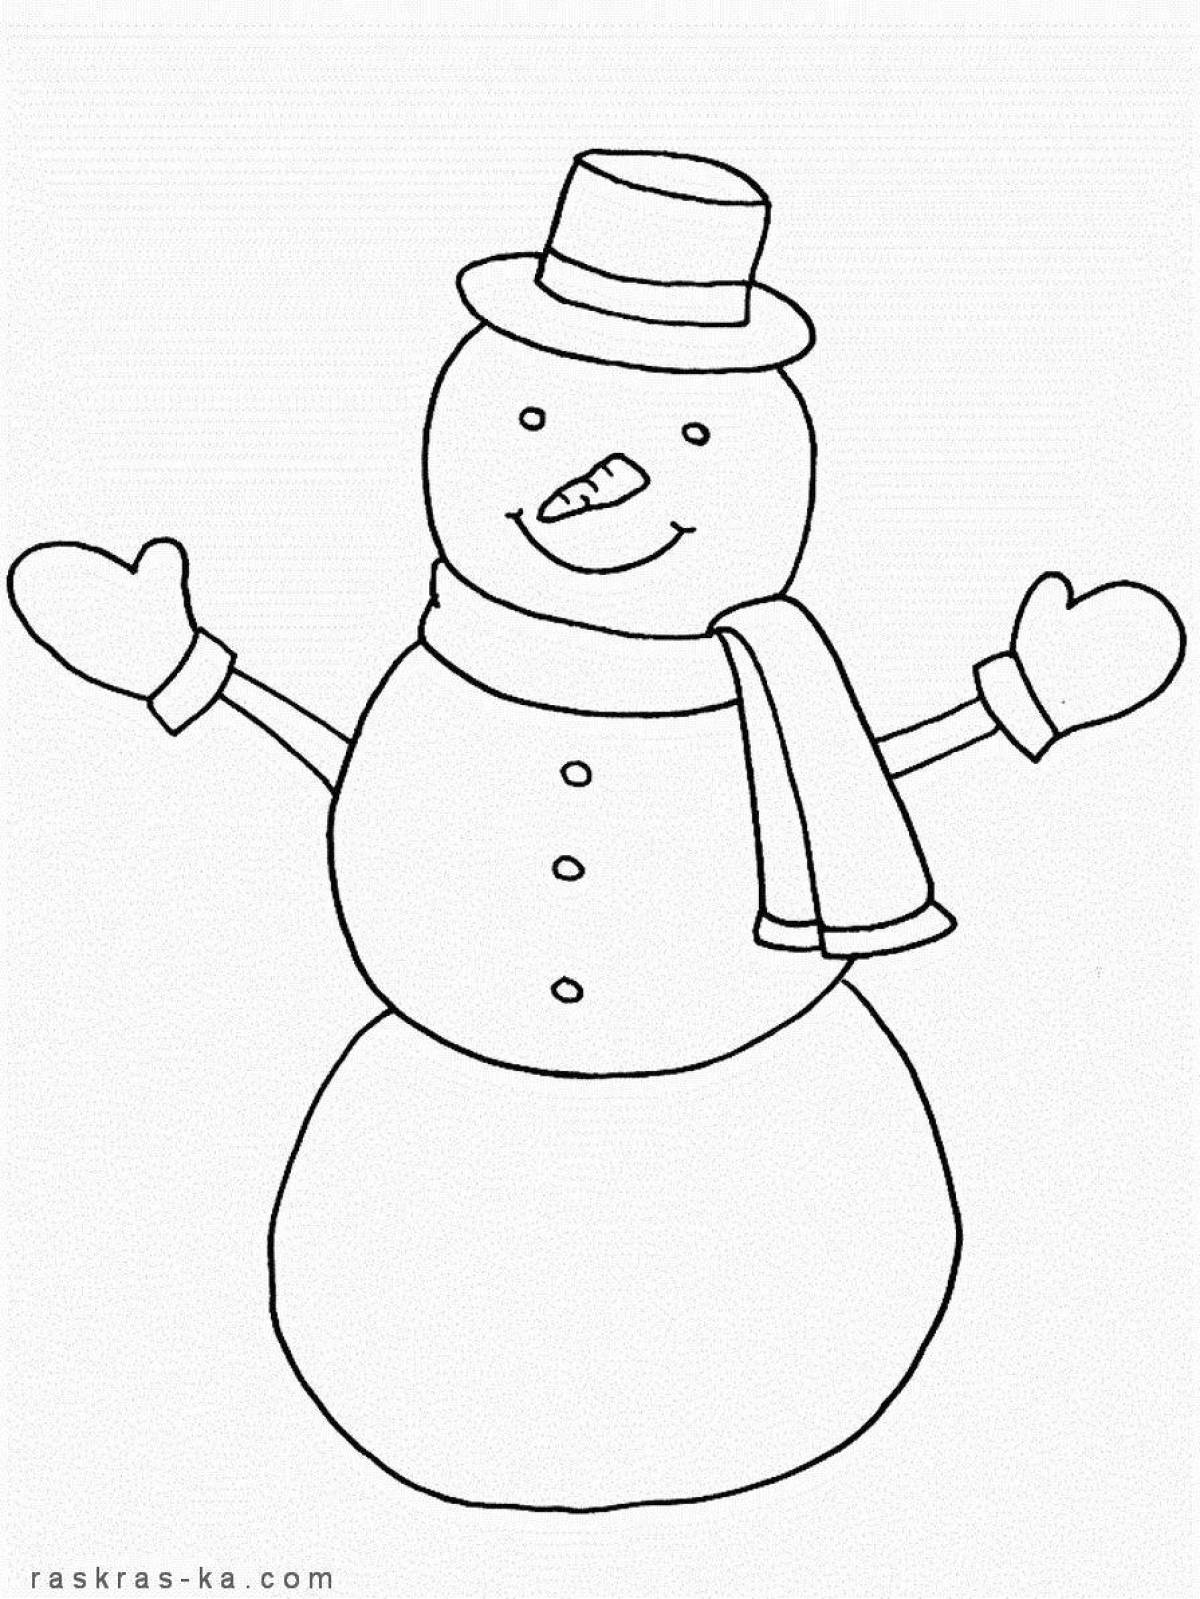 Stylish snowman coloring book for kids 5 6